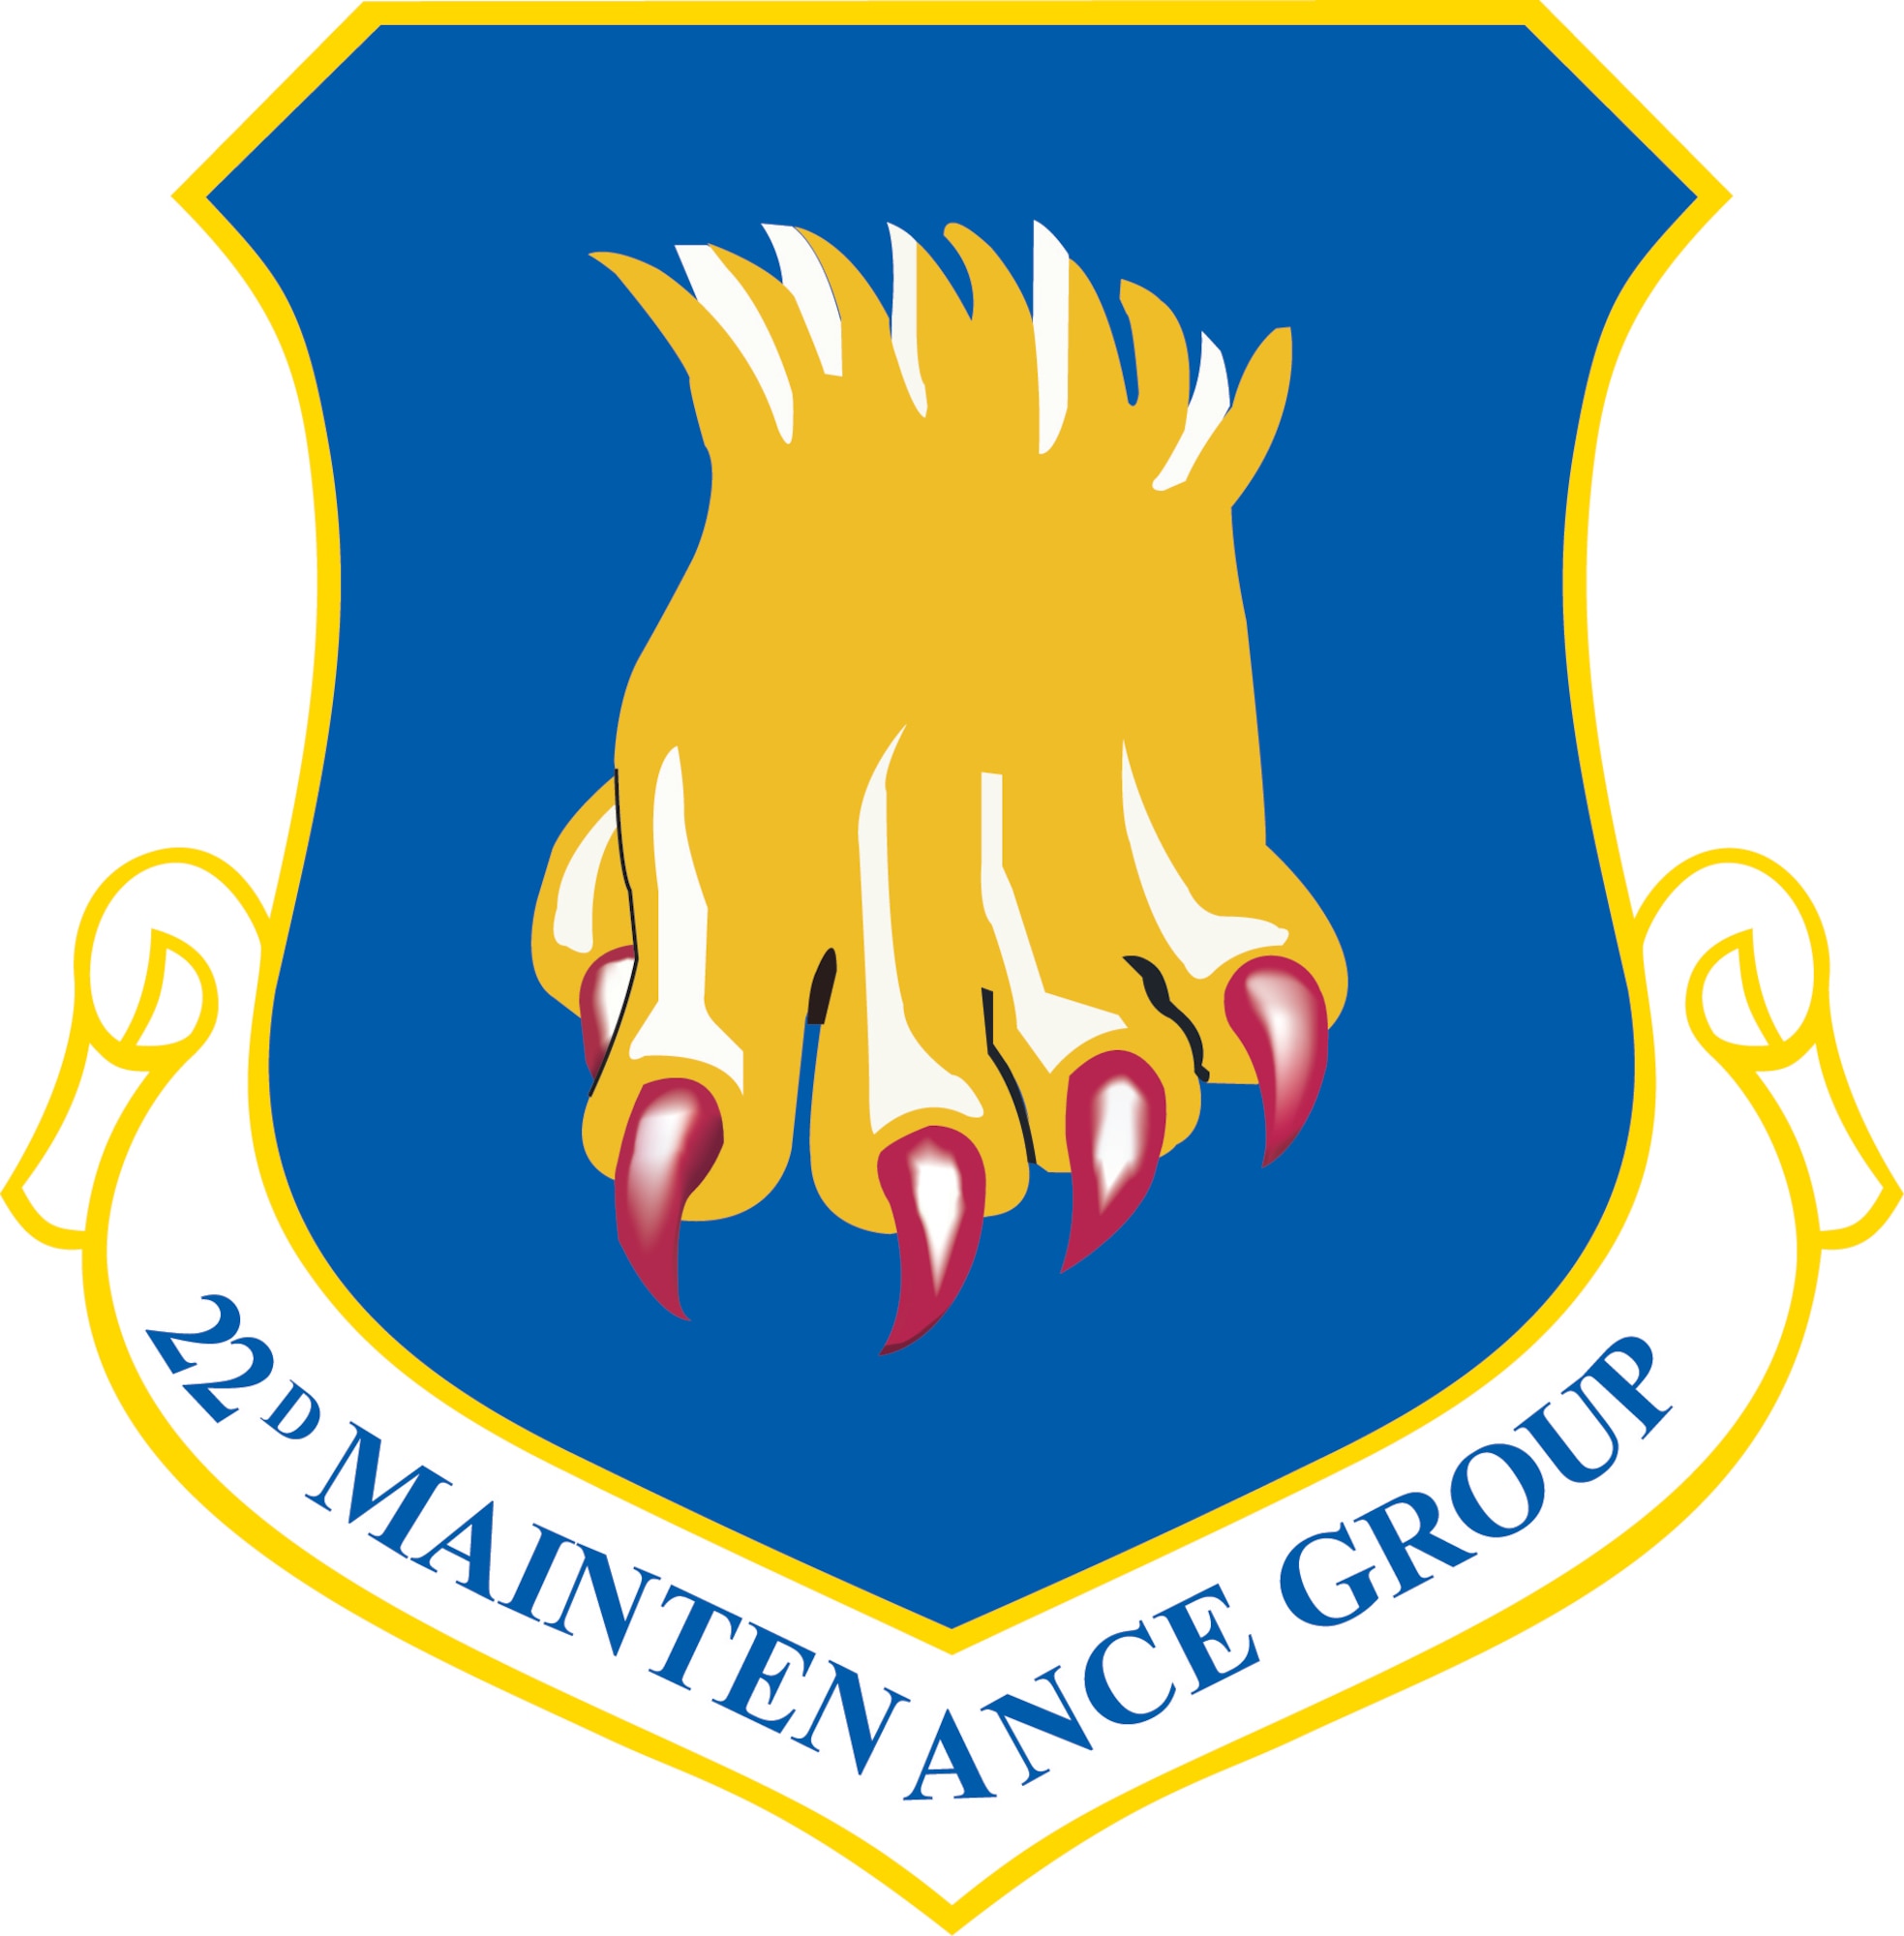 22nd Maintenance Group McConnell Air Force Base, Kan.